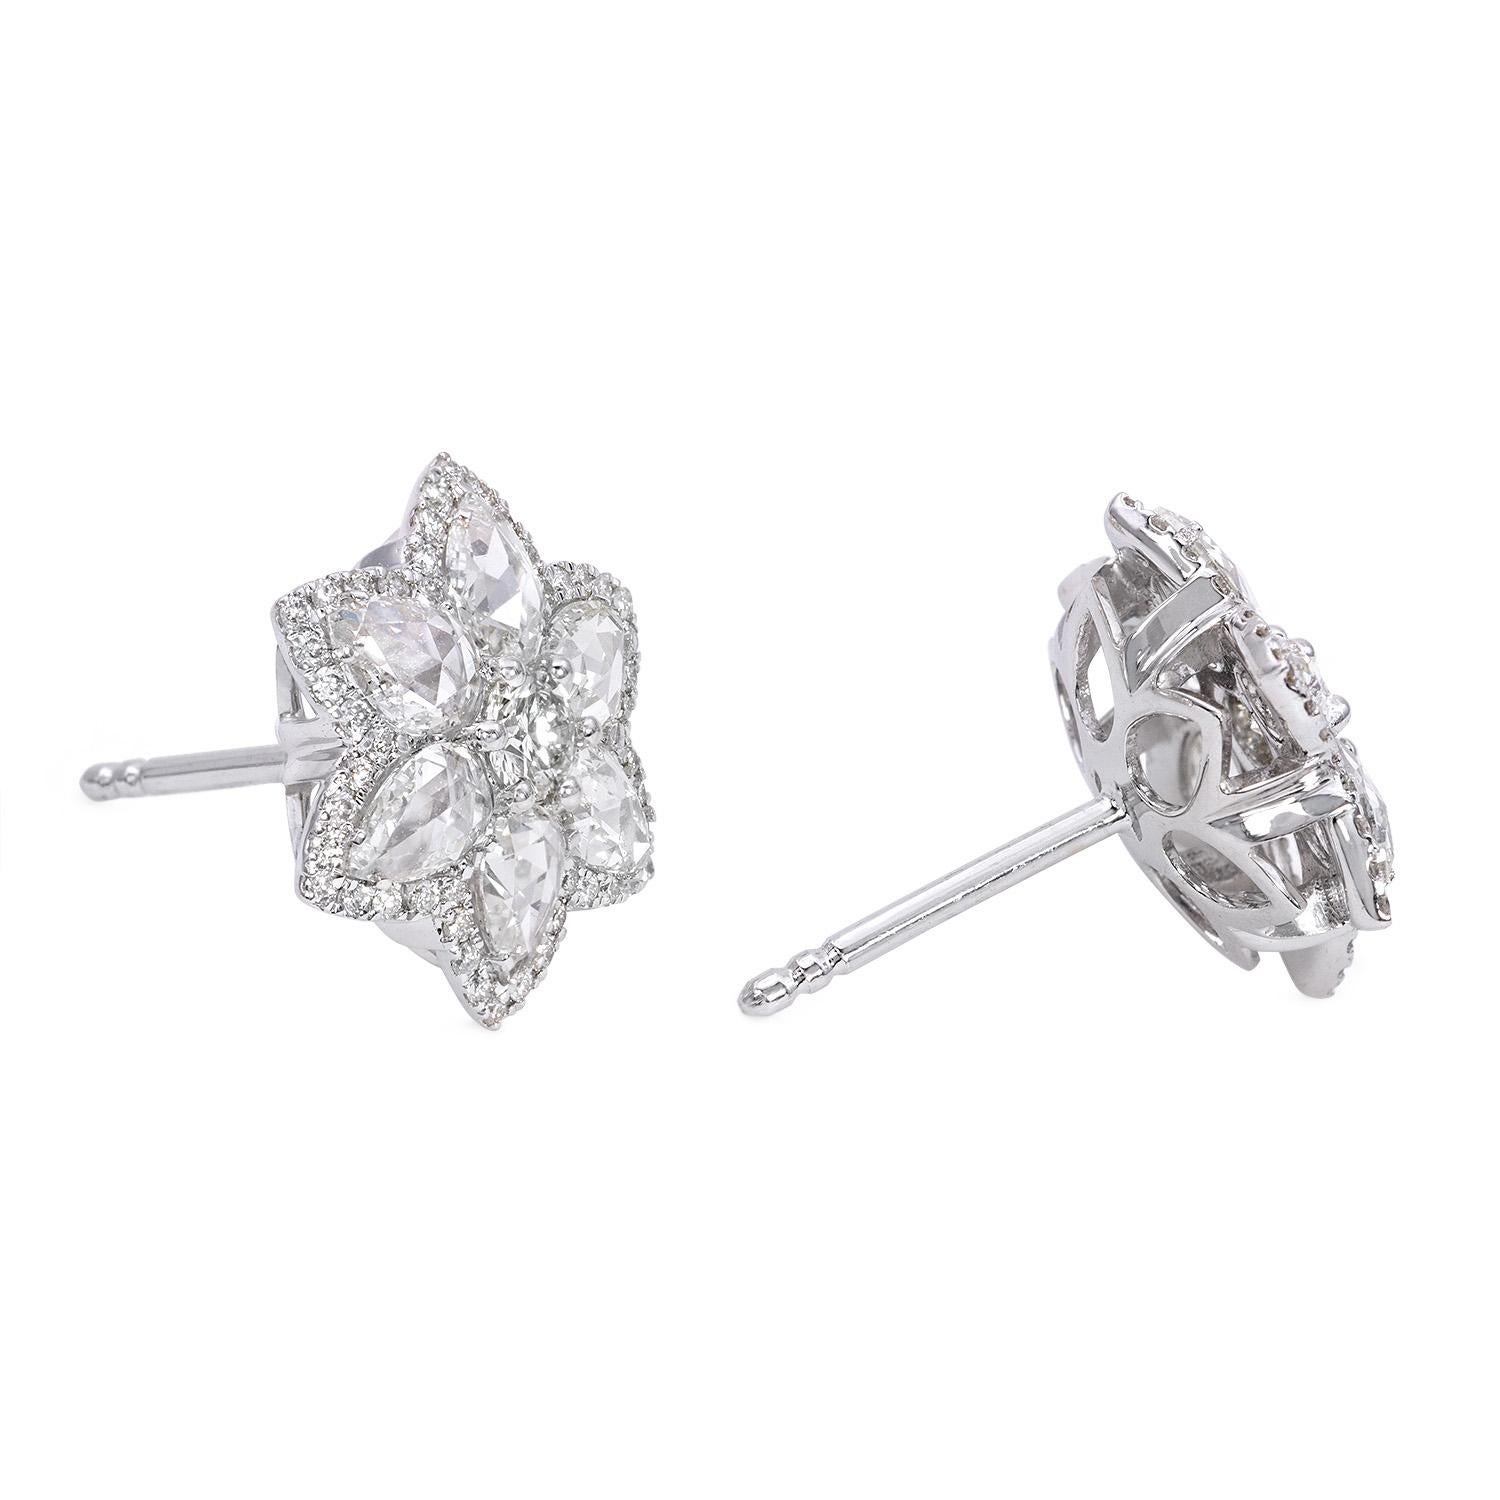 A WhiteRose collection top seller, the Venetian Earrings feature a 0.50carat round brilliant diamond centered around six rose cut diamonds. The Venetian Earrings can be paired with our Venetian Pendant or Ring.

Rose Cut Diamonds
Shape Pear shaped